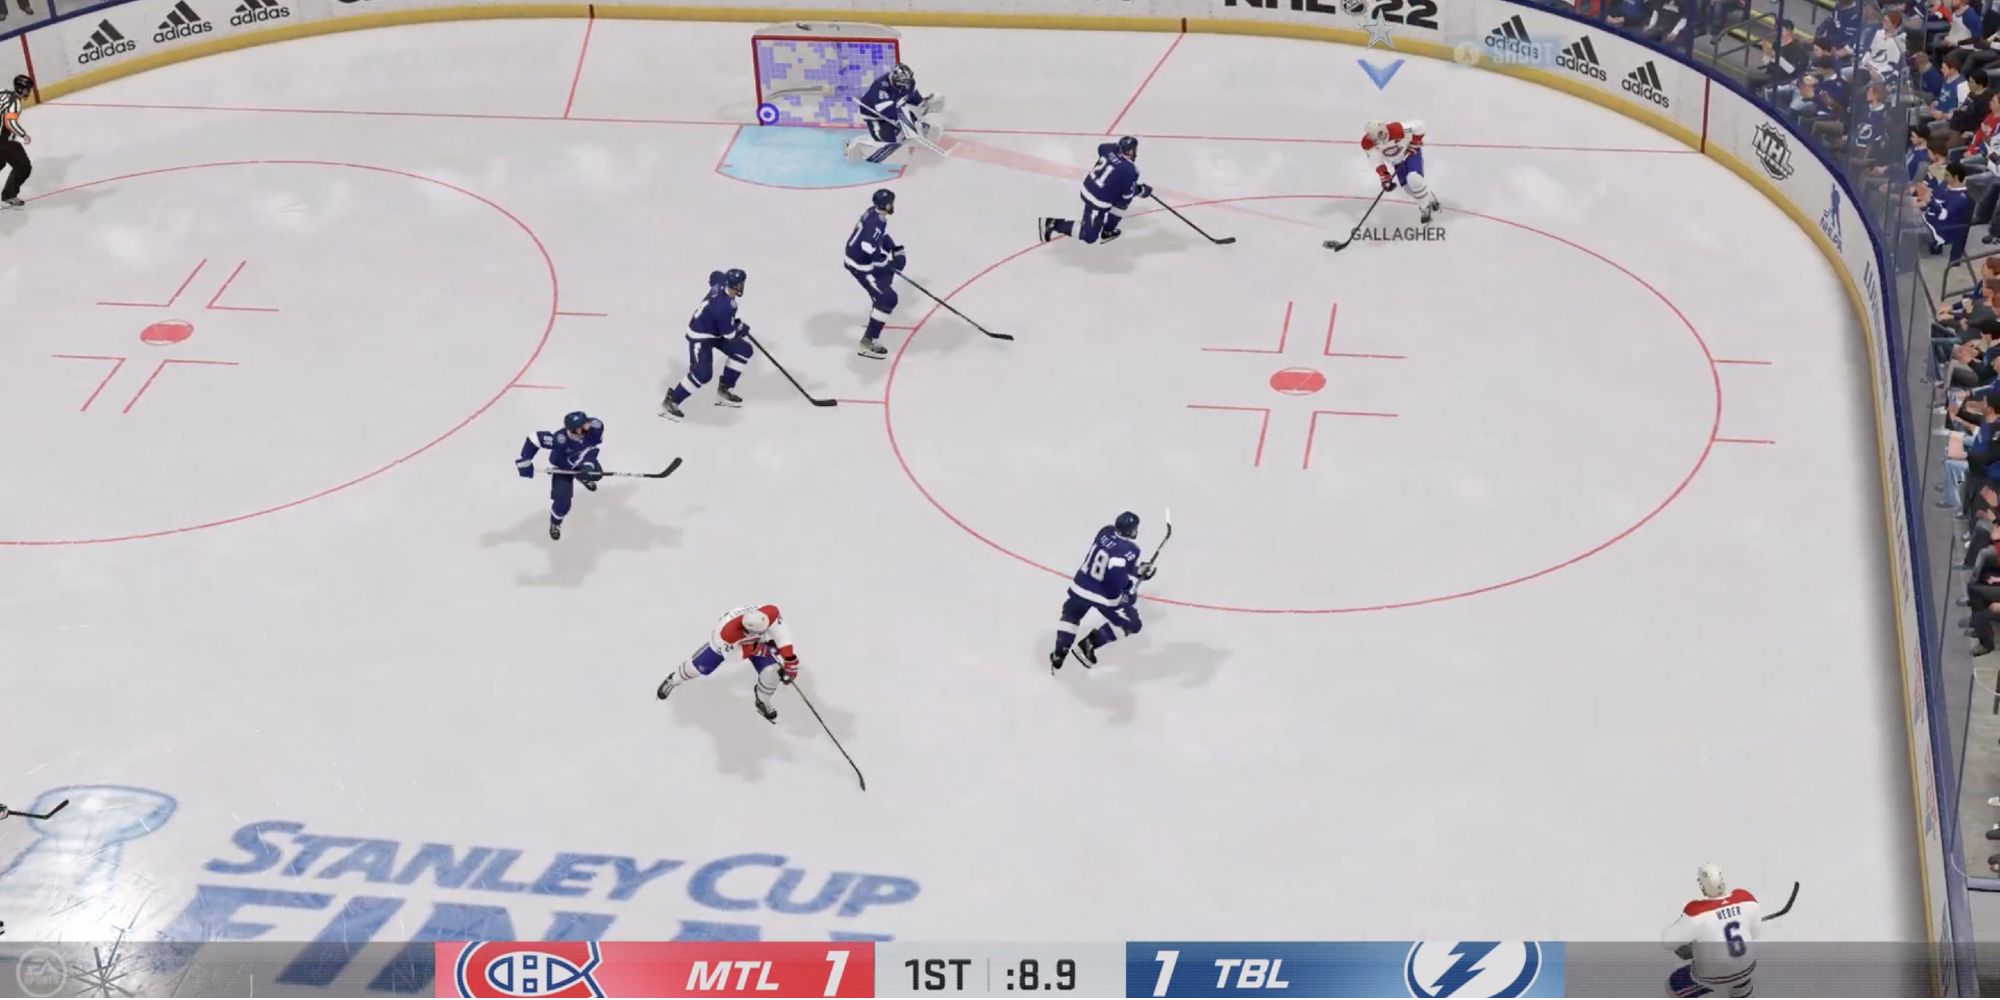 Drone view of ongoing NHL 23 game